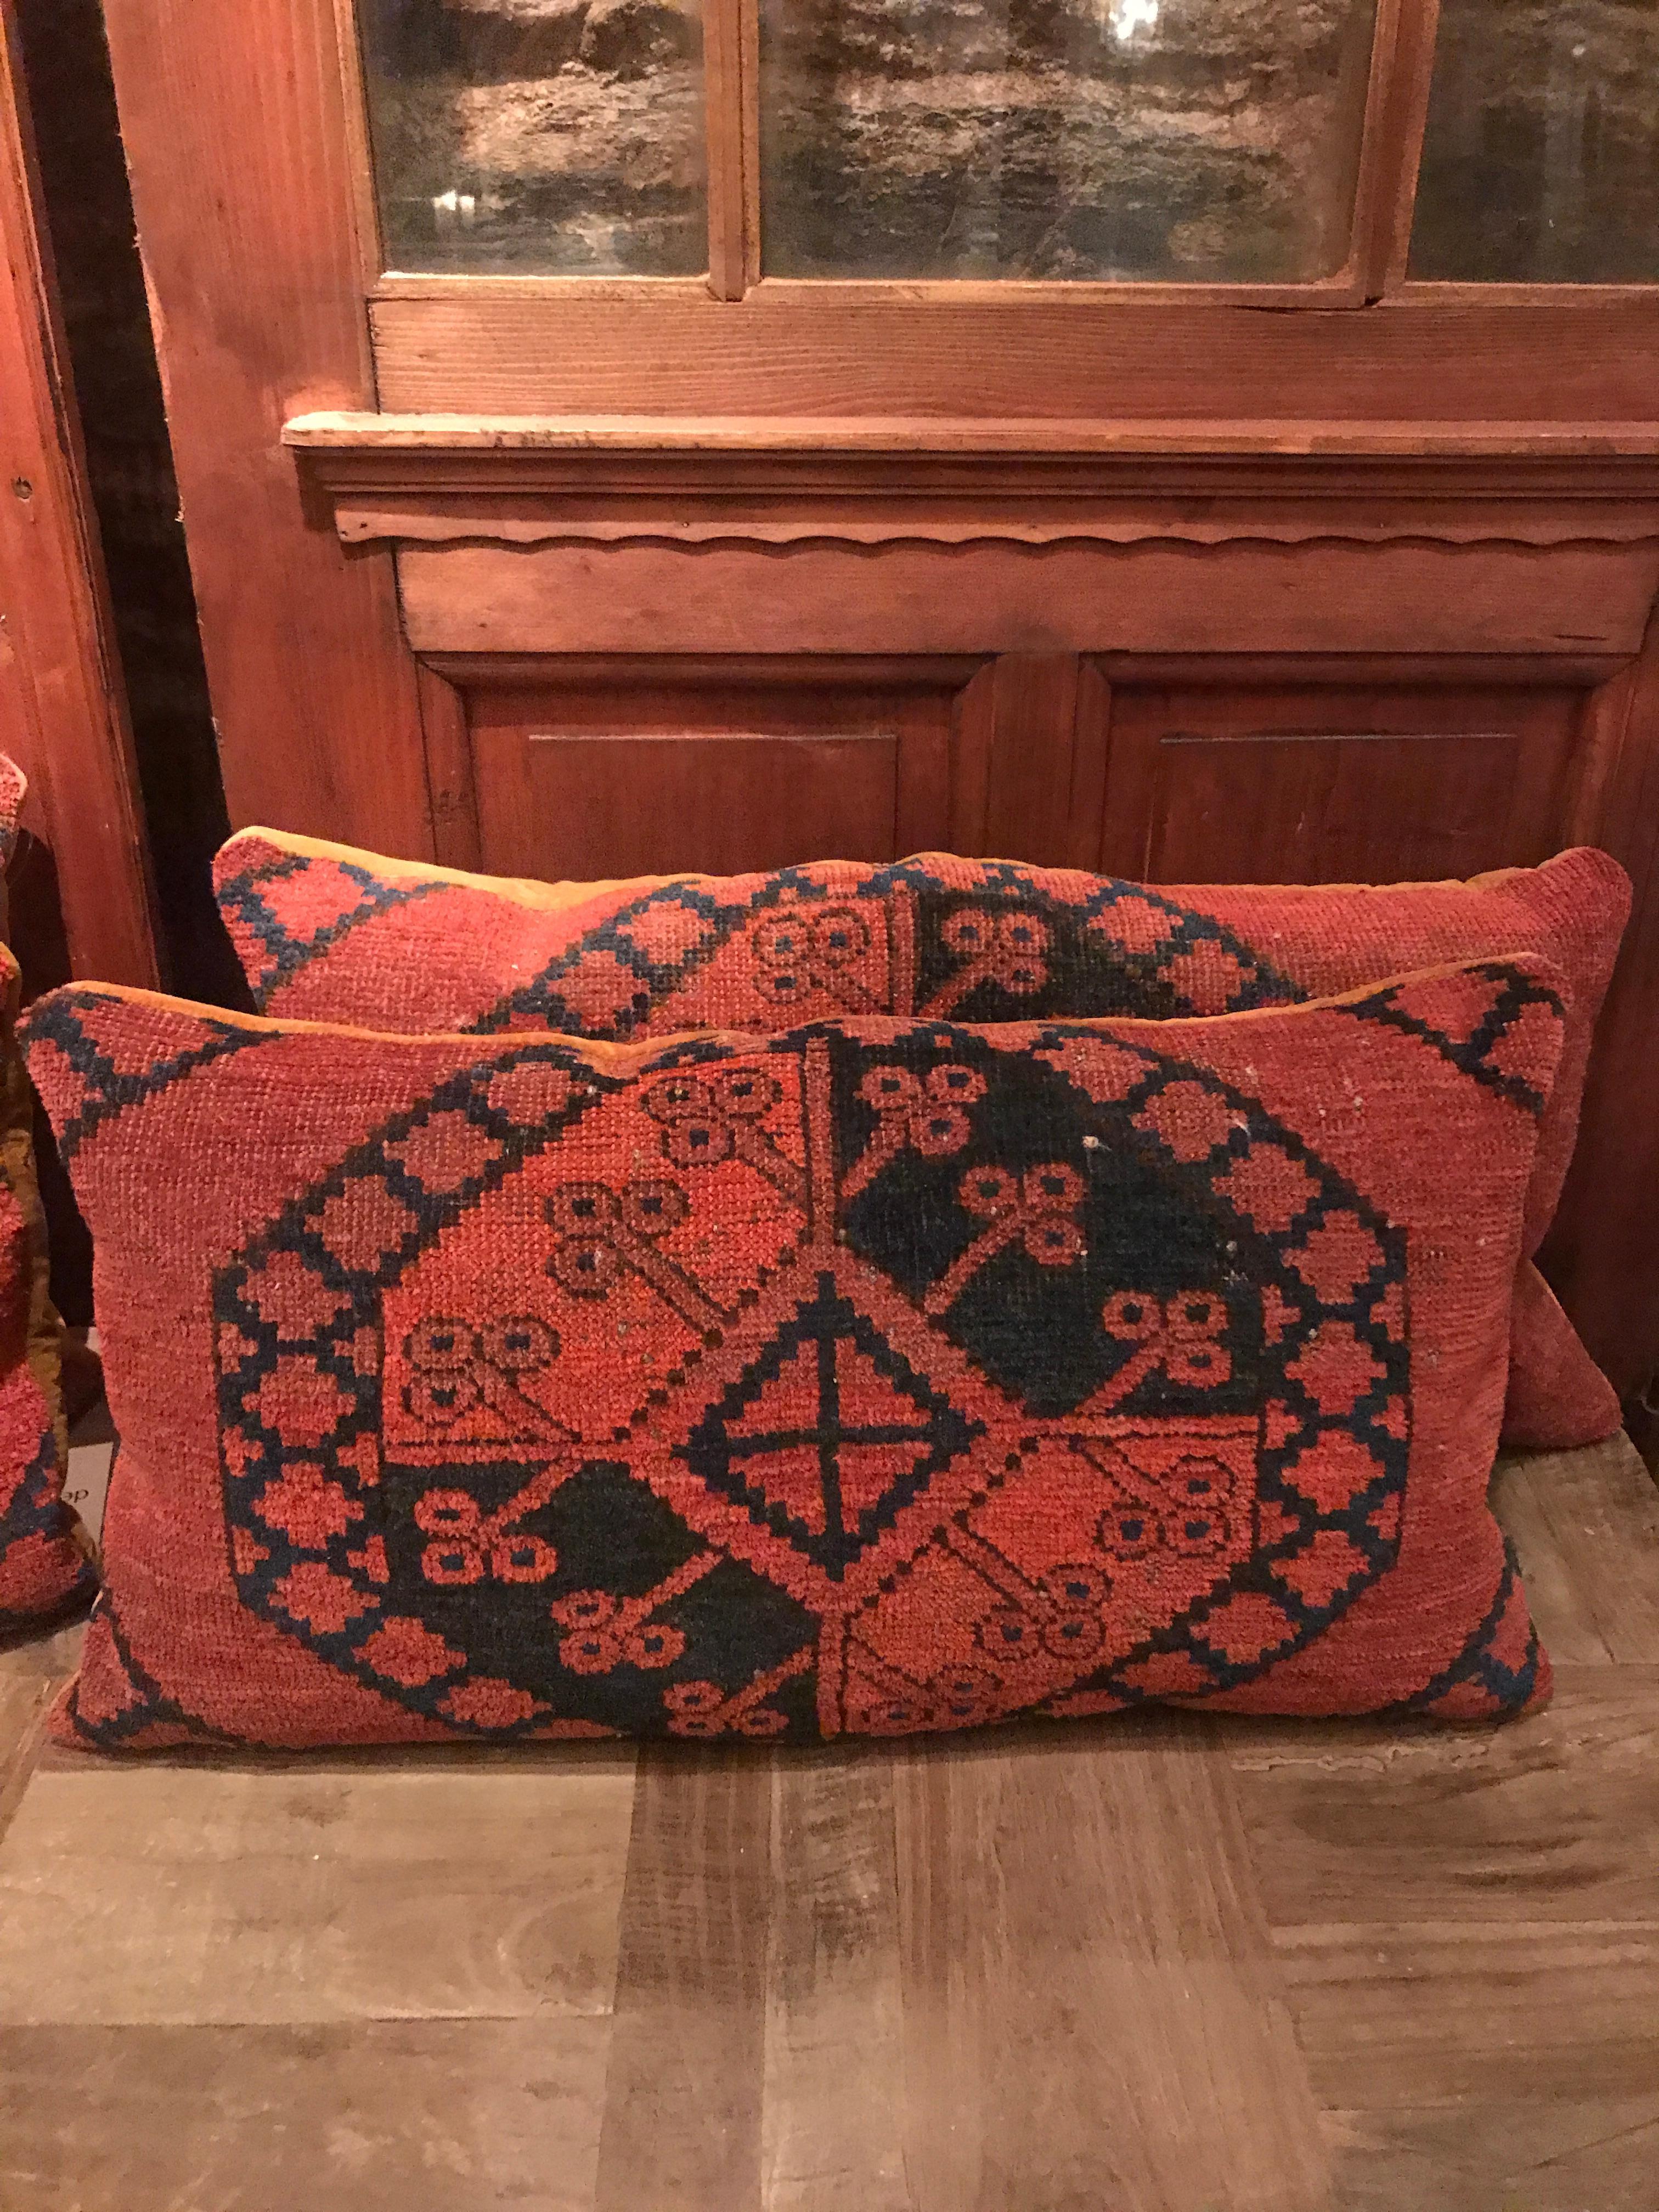 A deconstructed vintage Turkmen rug transformed into a pillow. The signature pattern of a Turkmen rug proudly displayed centered with color still vibrant after all these years. Hand woven from the finest wool and dyed with vegetable dye. The backing